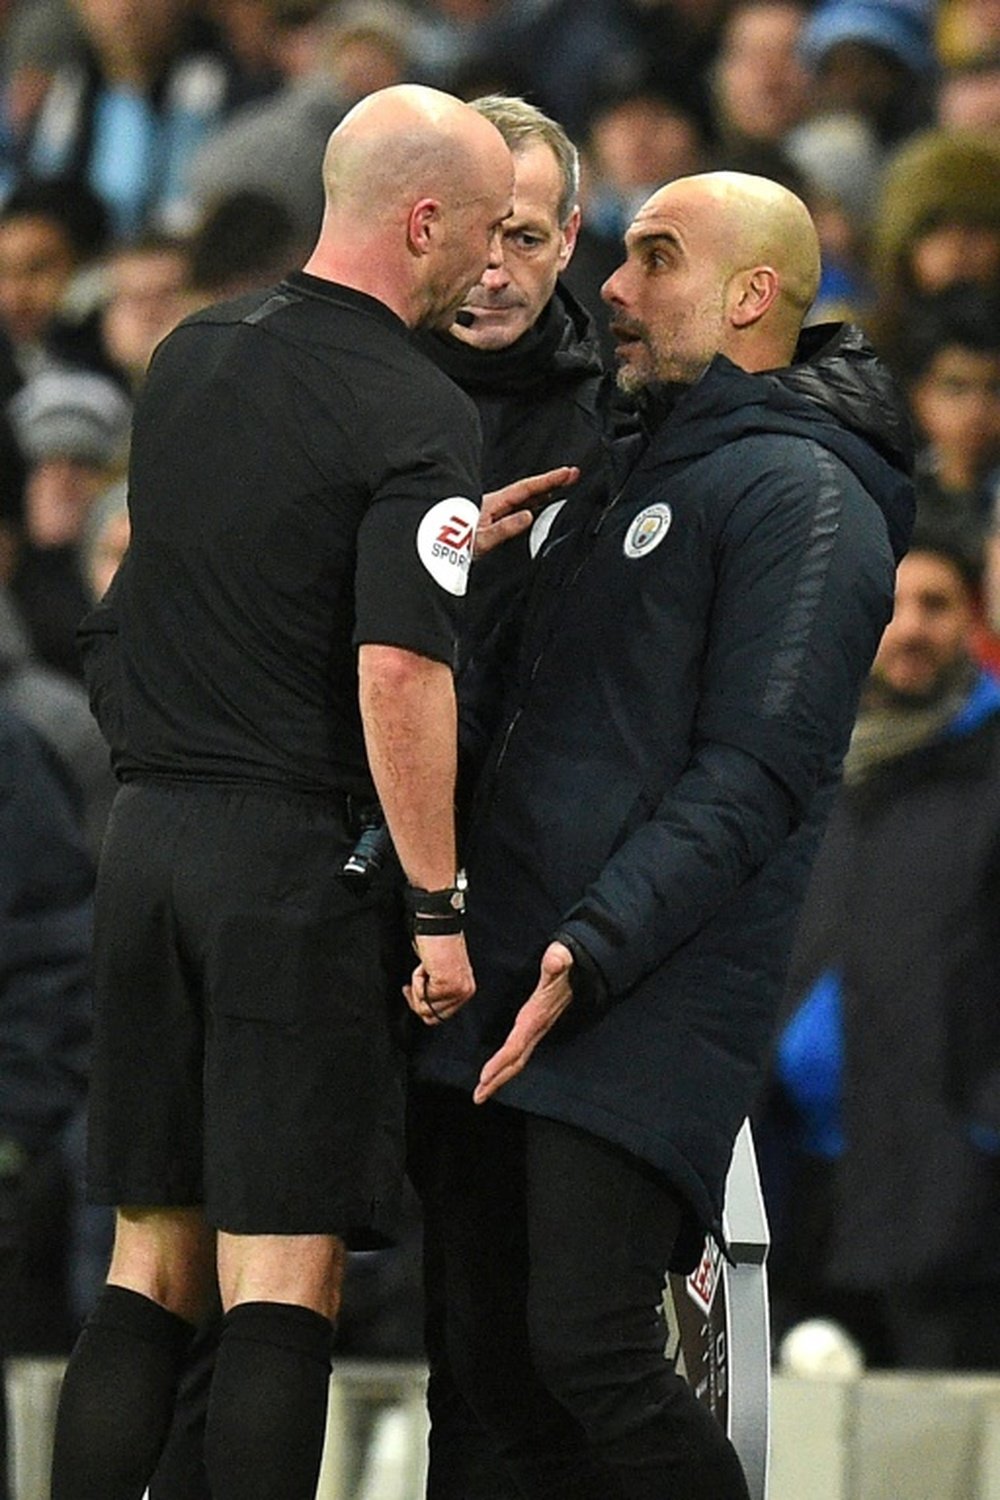 Guardiola has been warned about his behaviour on the touchline. AFP